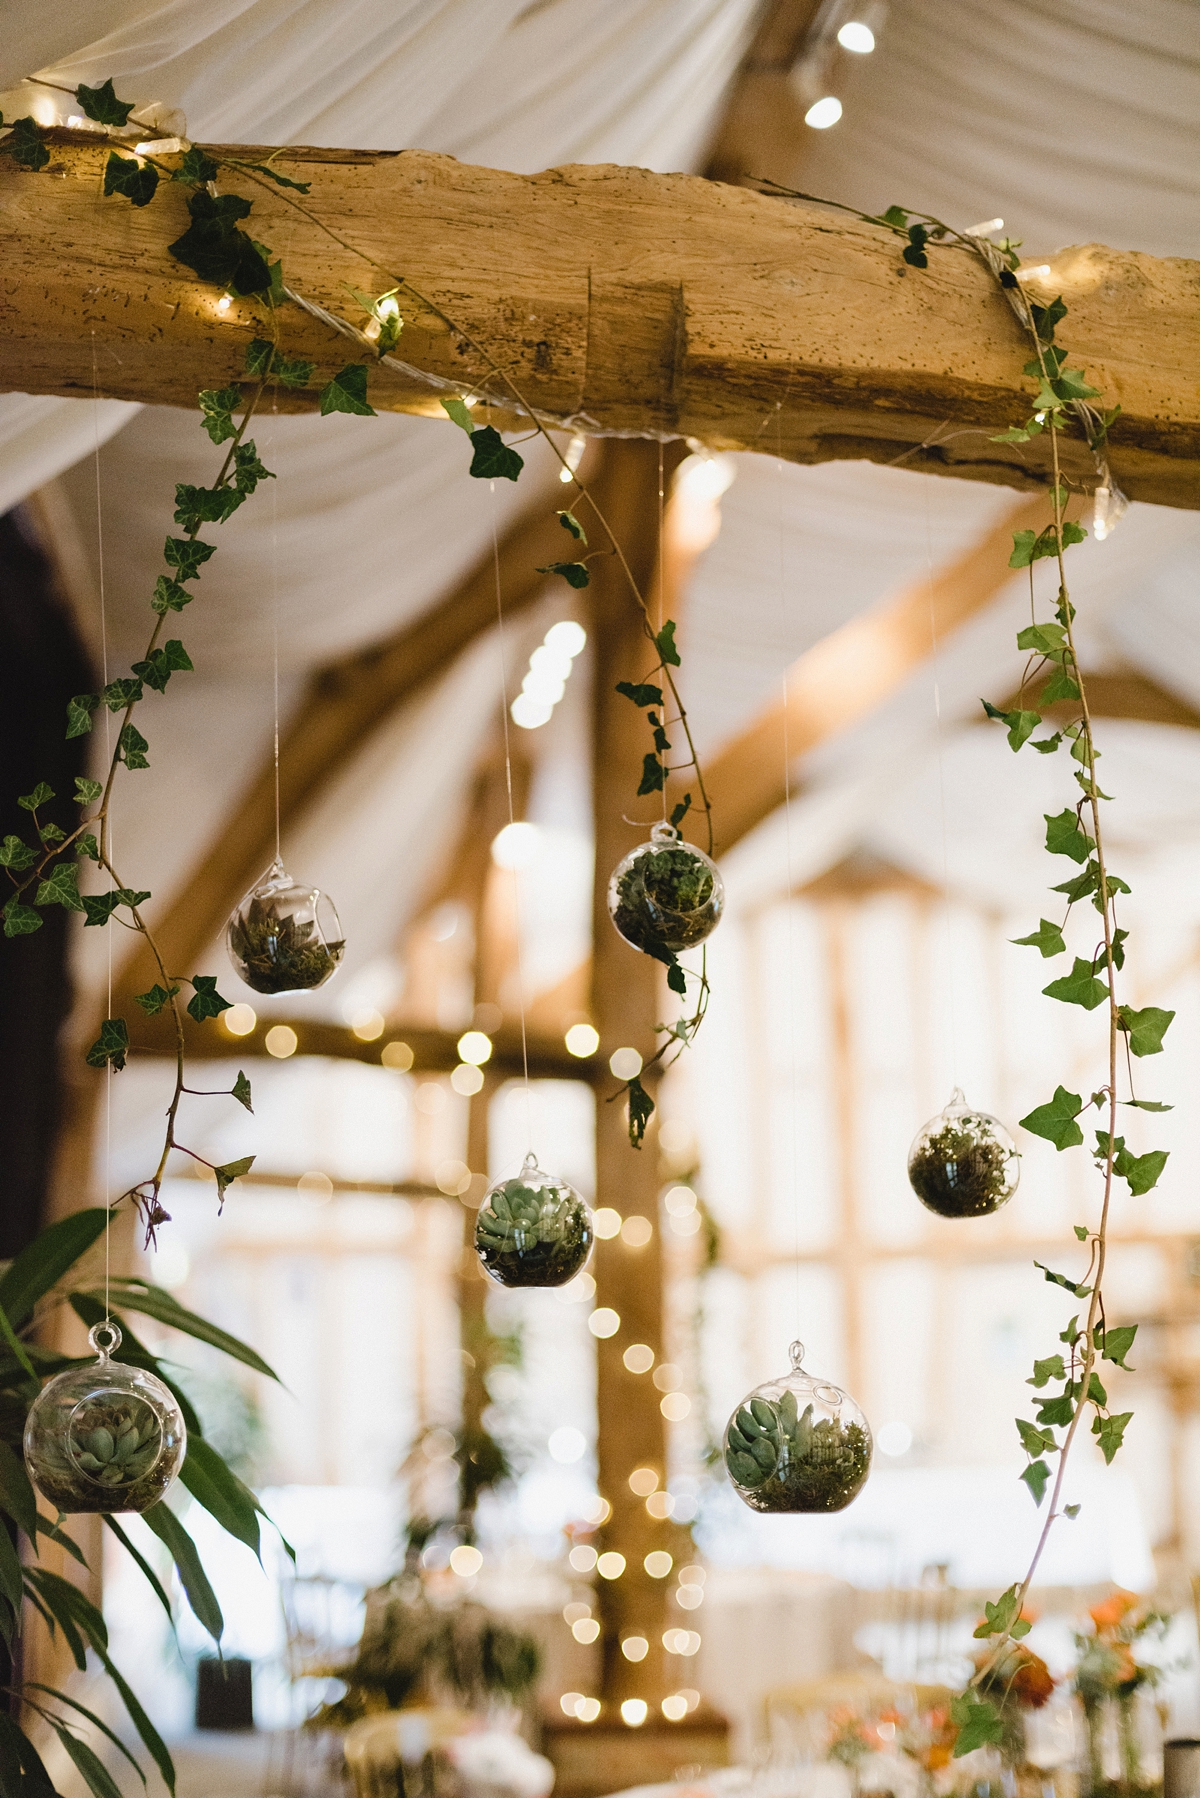 38 Hanging ivy and green floral decor in baubles